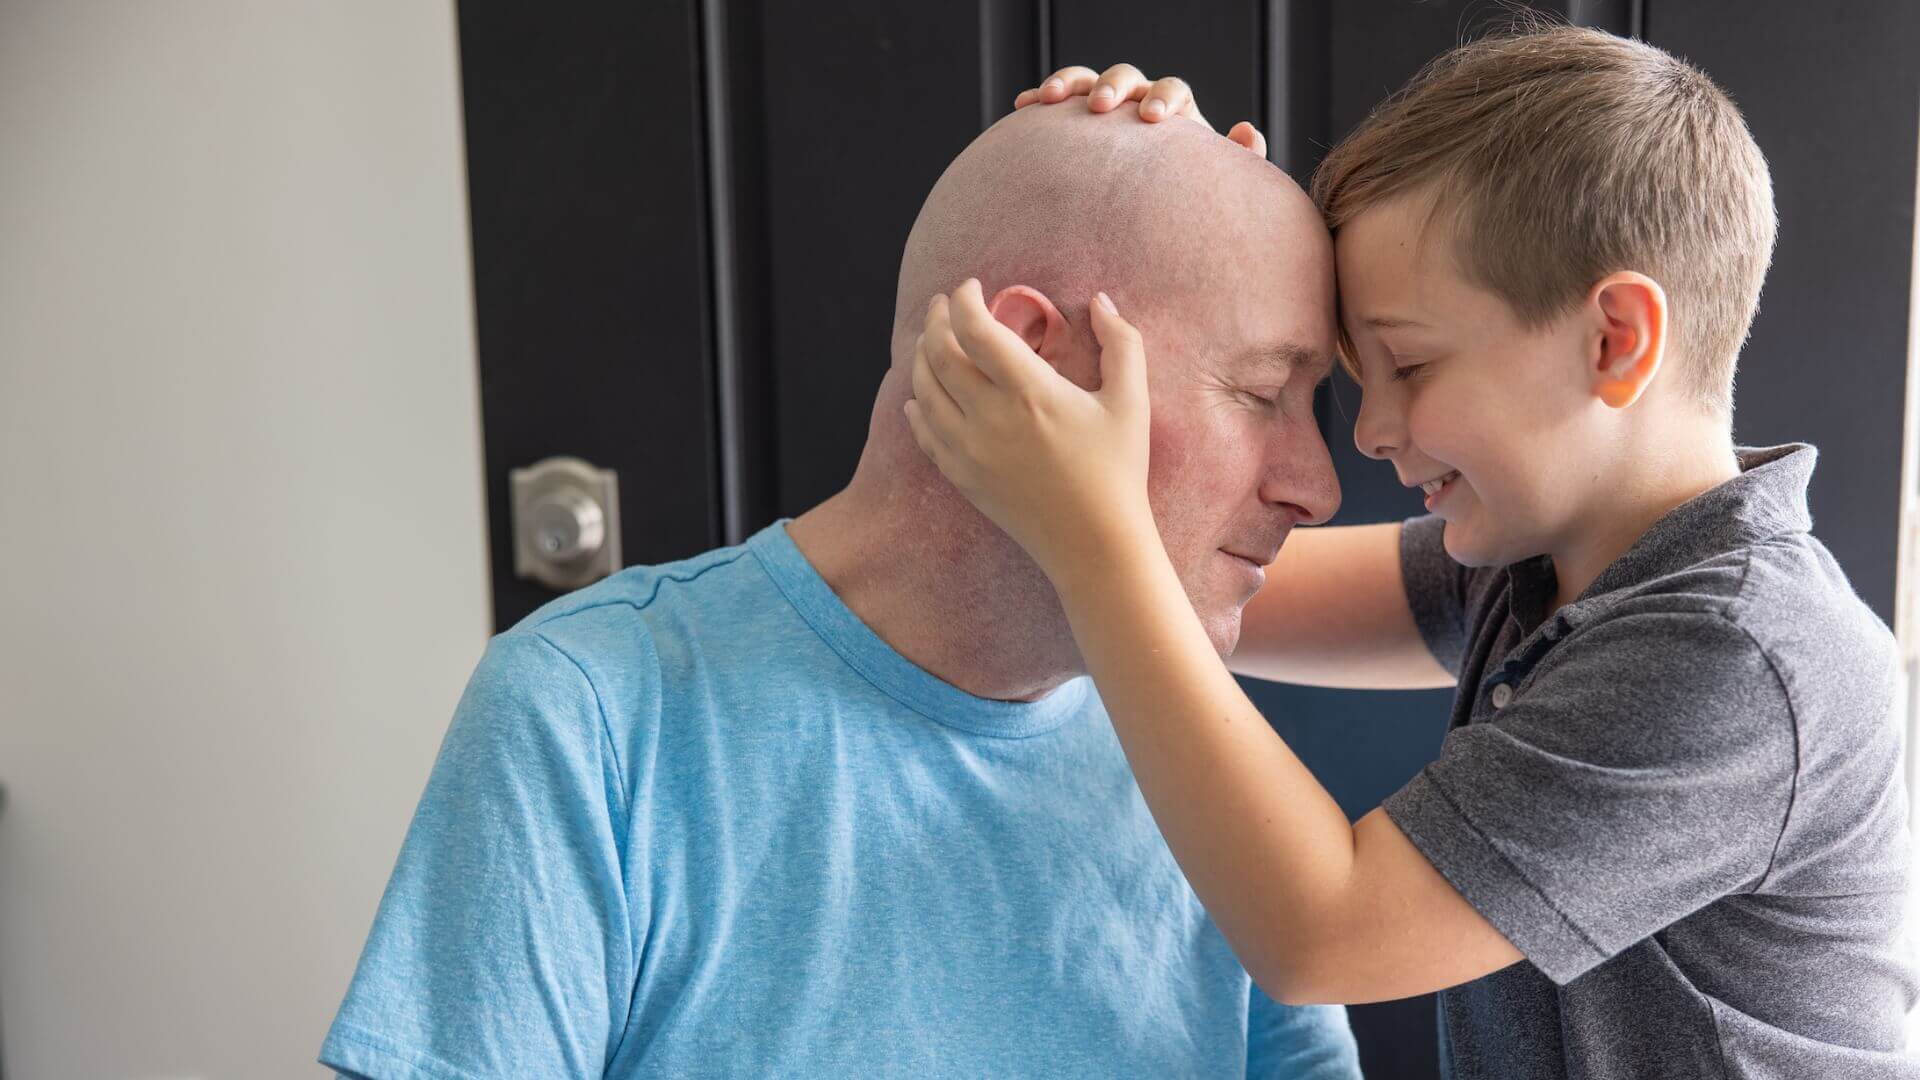 ALS patient and smiling child hugging with closed eyes